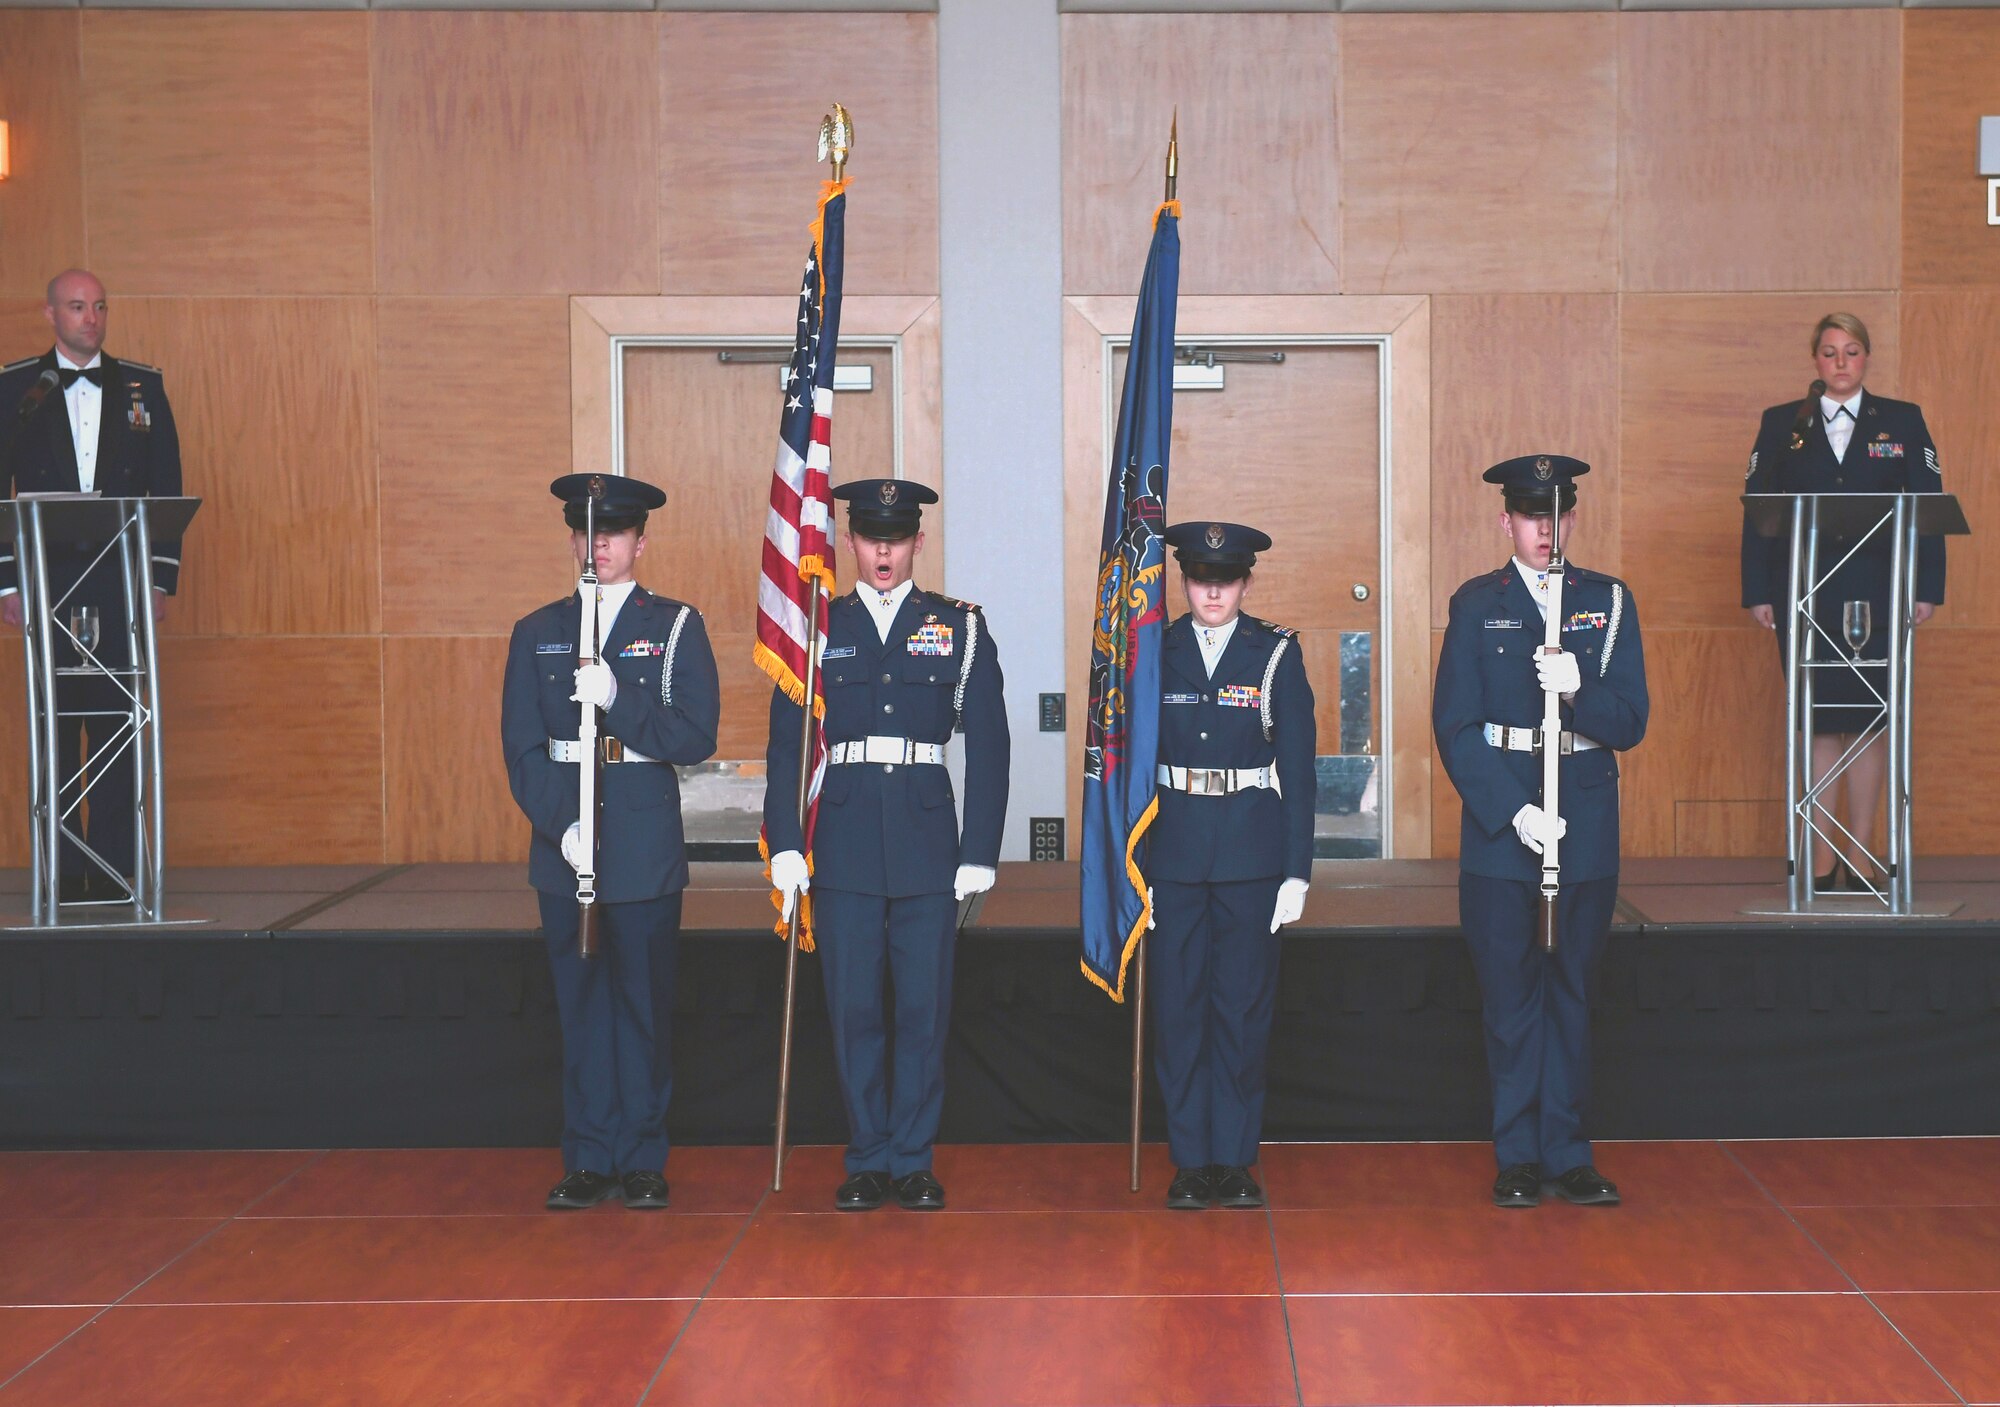 The 603rd Civil Air Patrol Honor Guard posts the colors at the 911th Airlift Wing annual awards banquet Pittsburgh International Airport, Pennsylvania, May 6, 2018. Annual award winners for 2017 were ceremoniously recognized by wing leadership during the event.(U.S. Air Force Photo by Staff Sgt. Zachary Vucic)